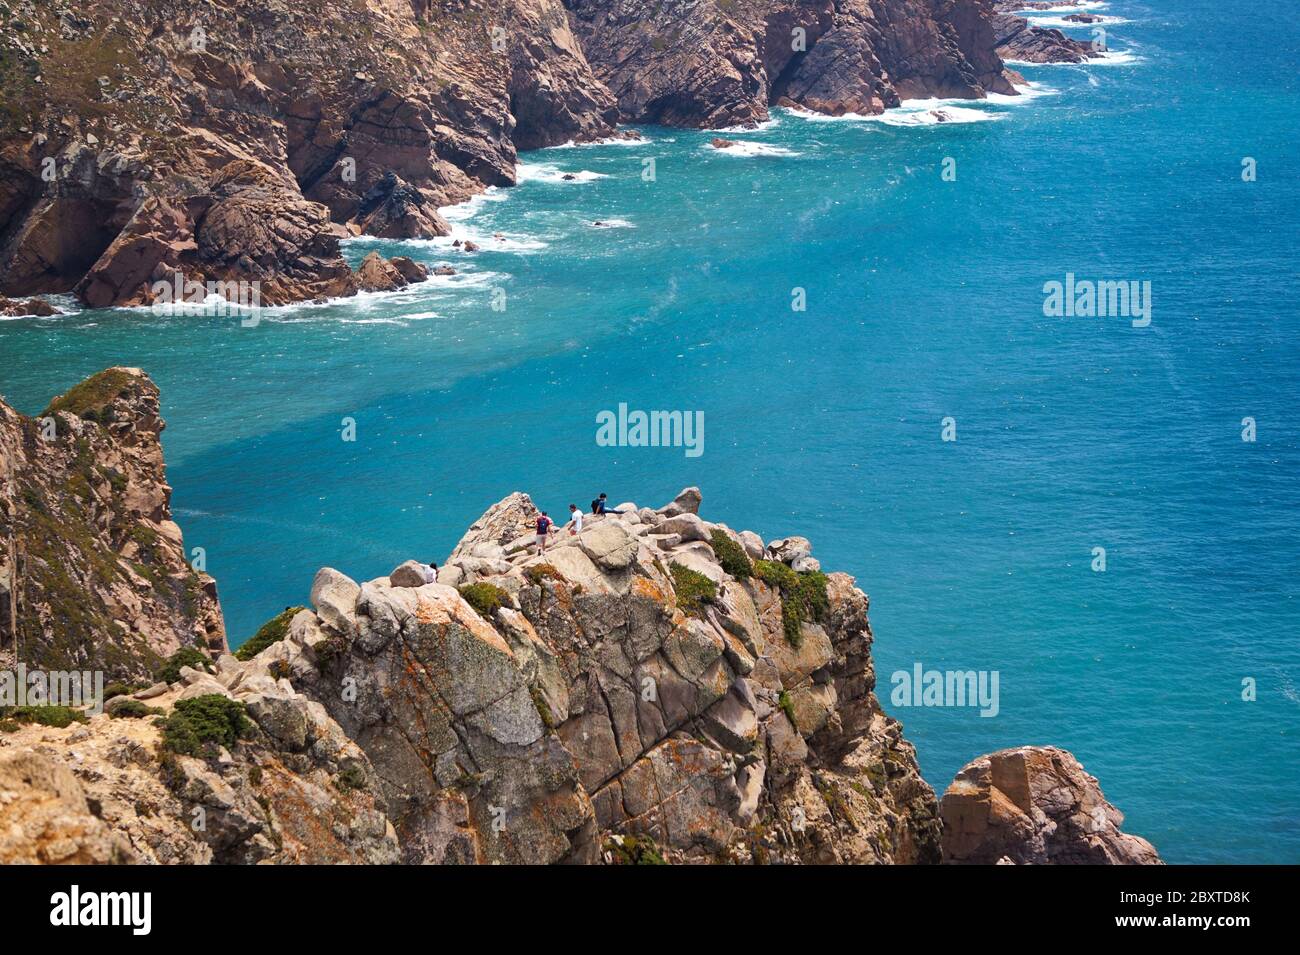 Amazing view of Cabo da Roca and tourists climbing on the cliff with turqoise ocean as a background during sunny day Stock Photo